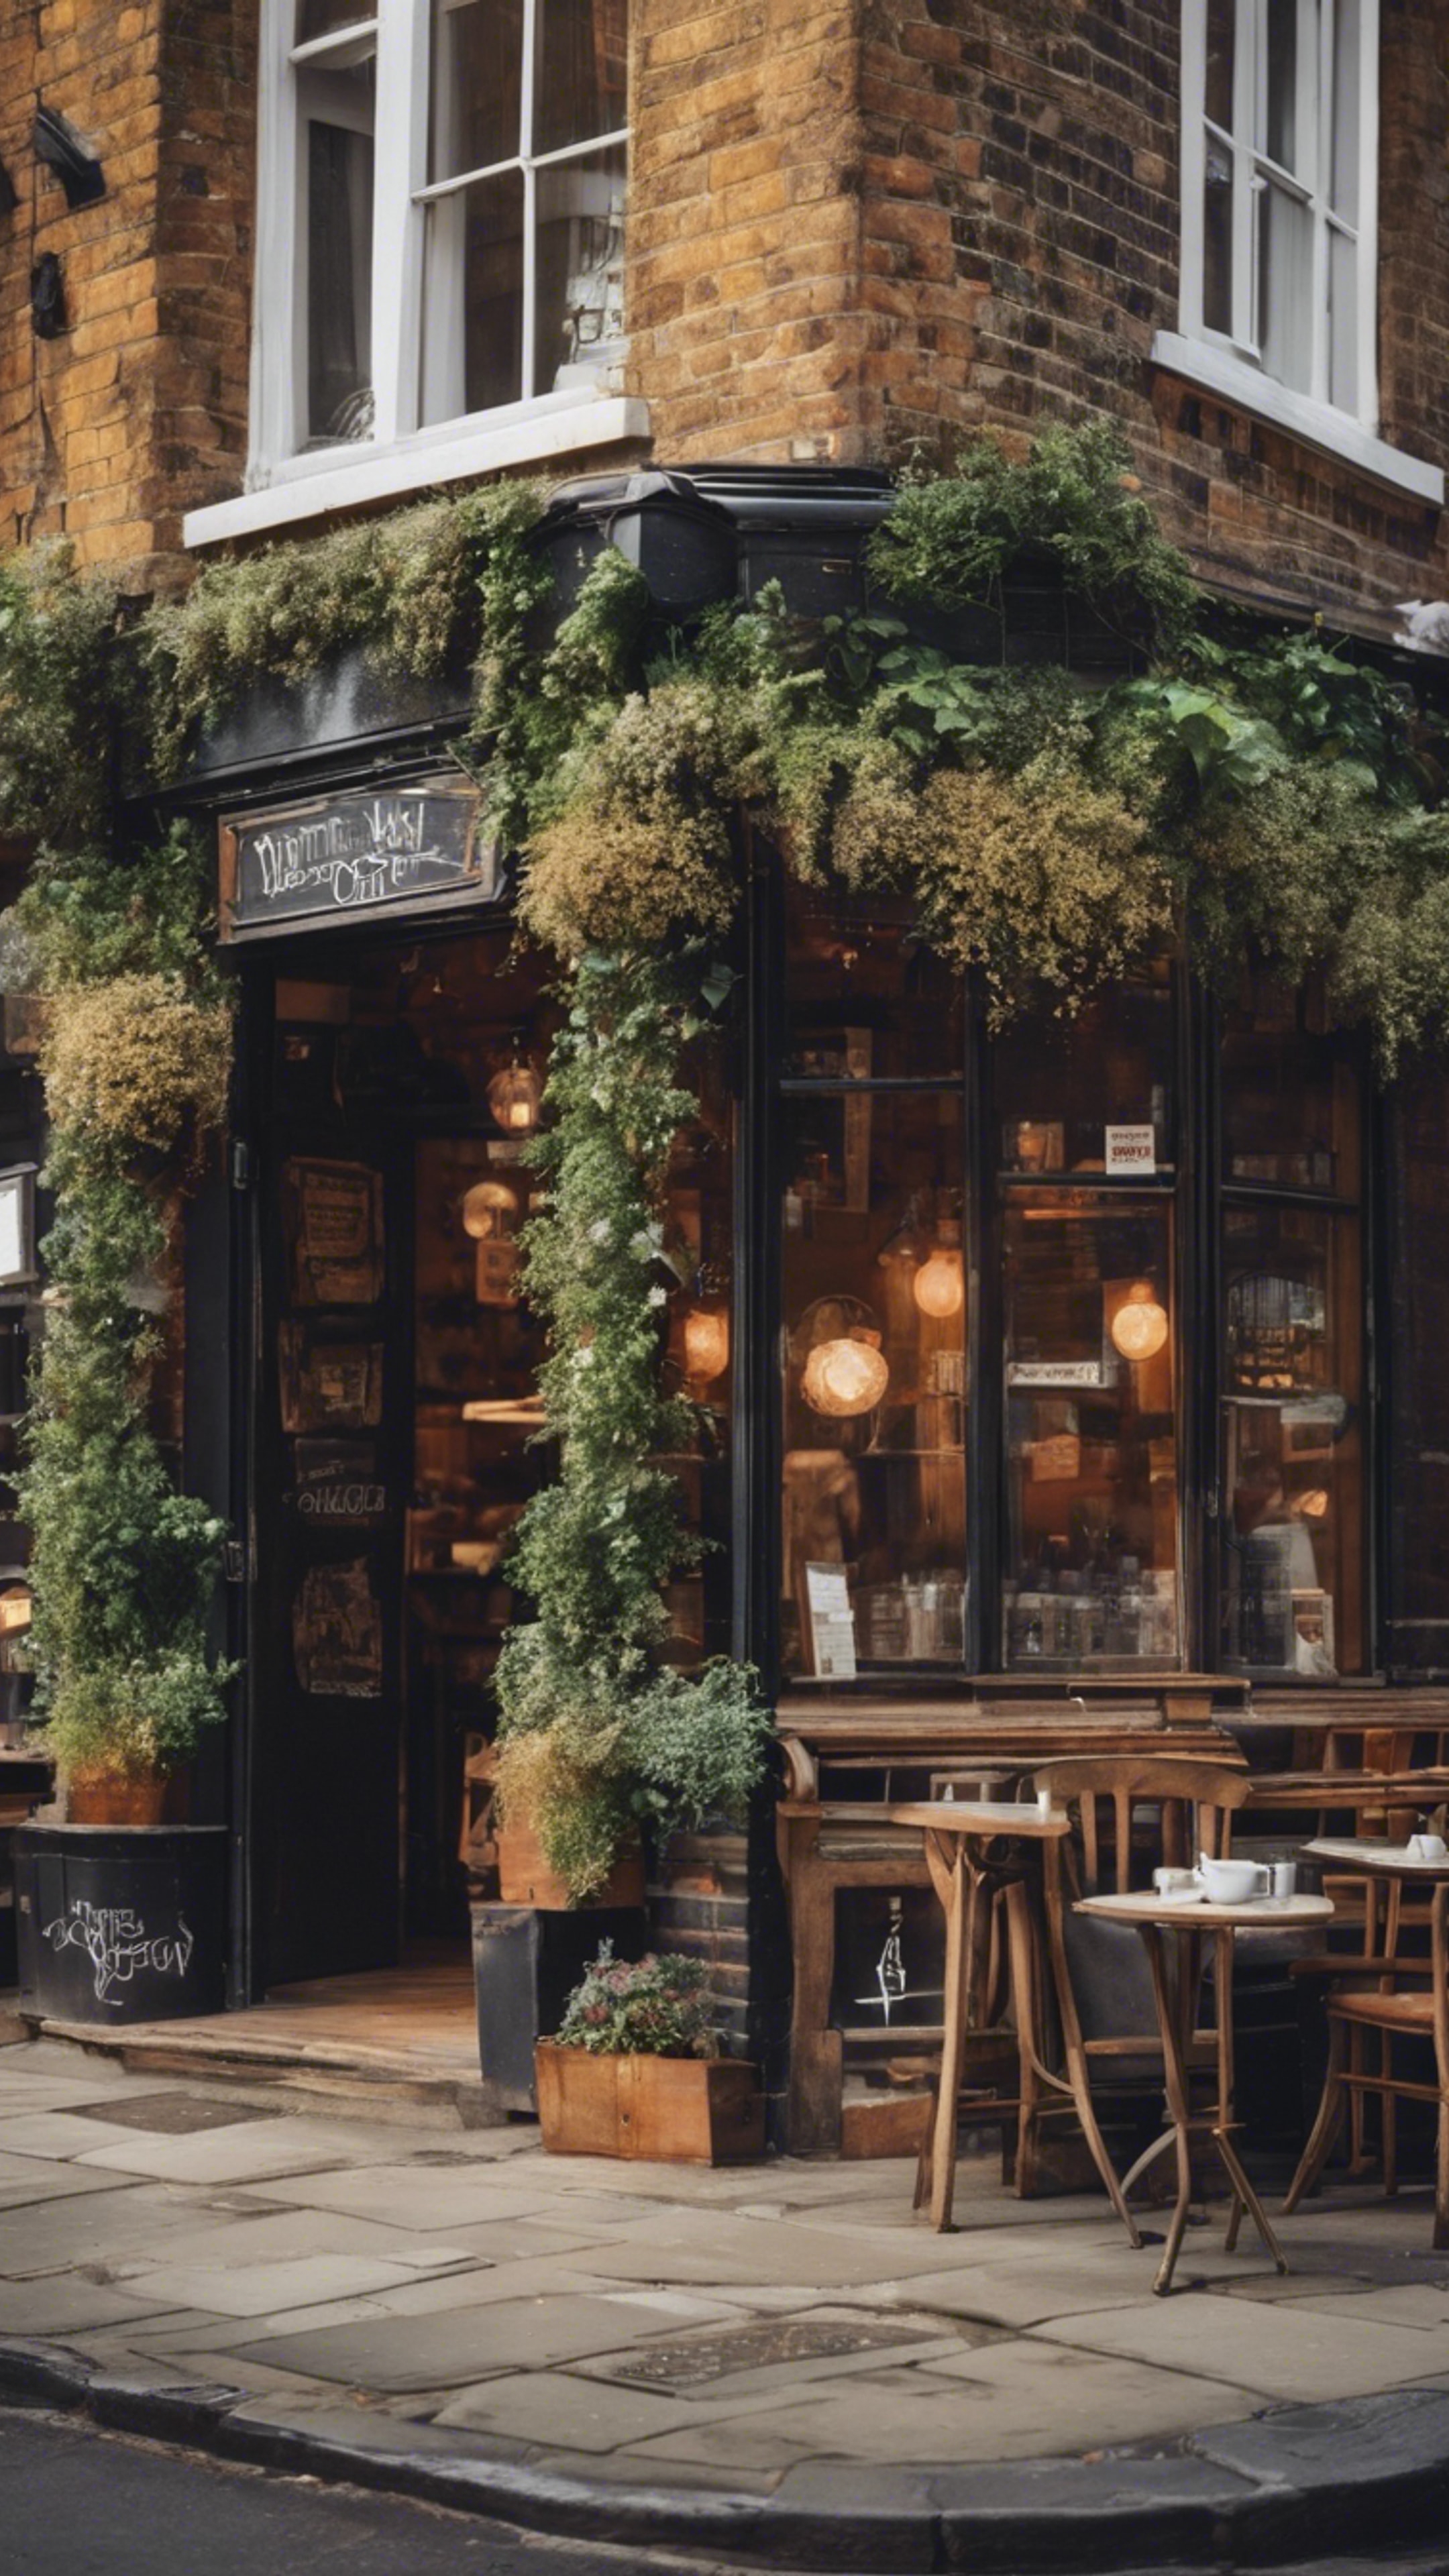 A rustic, quaint little cafe in the heart of London. Tapet[88734f965efa416ca947]